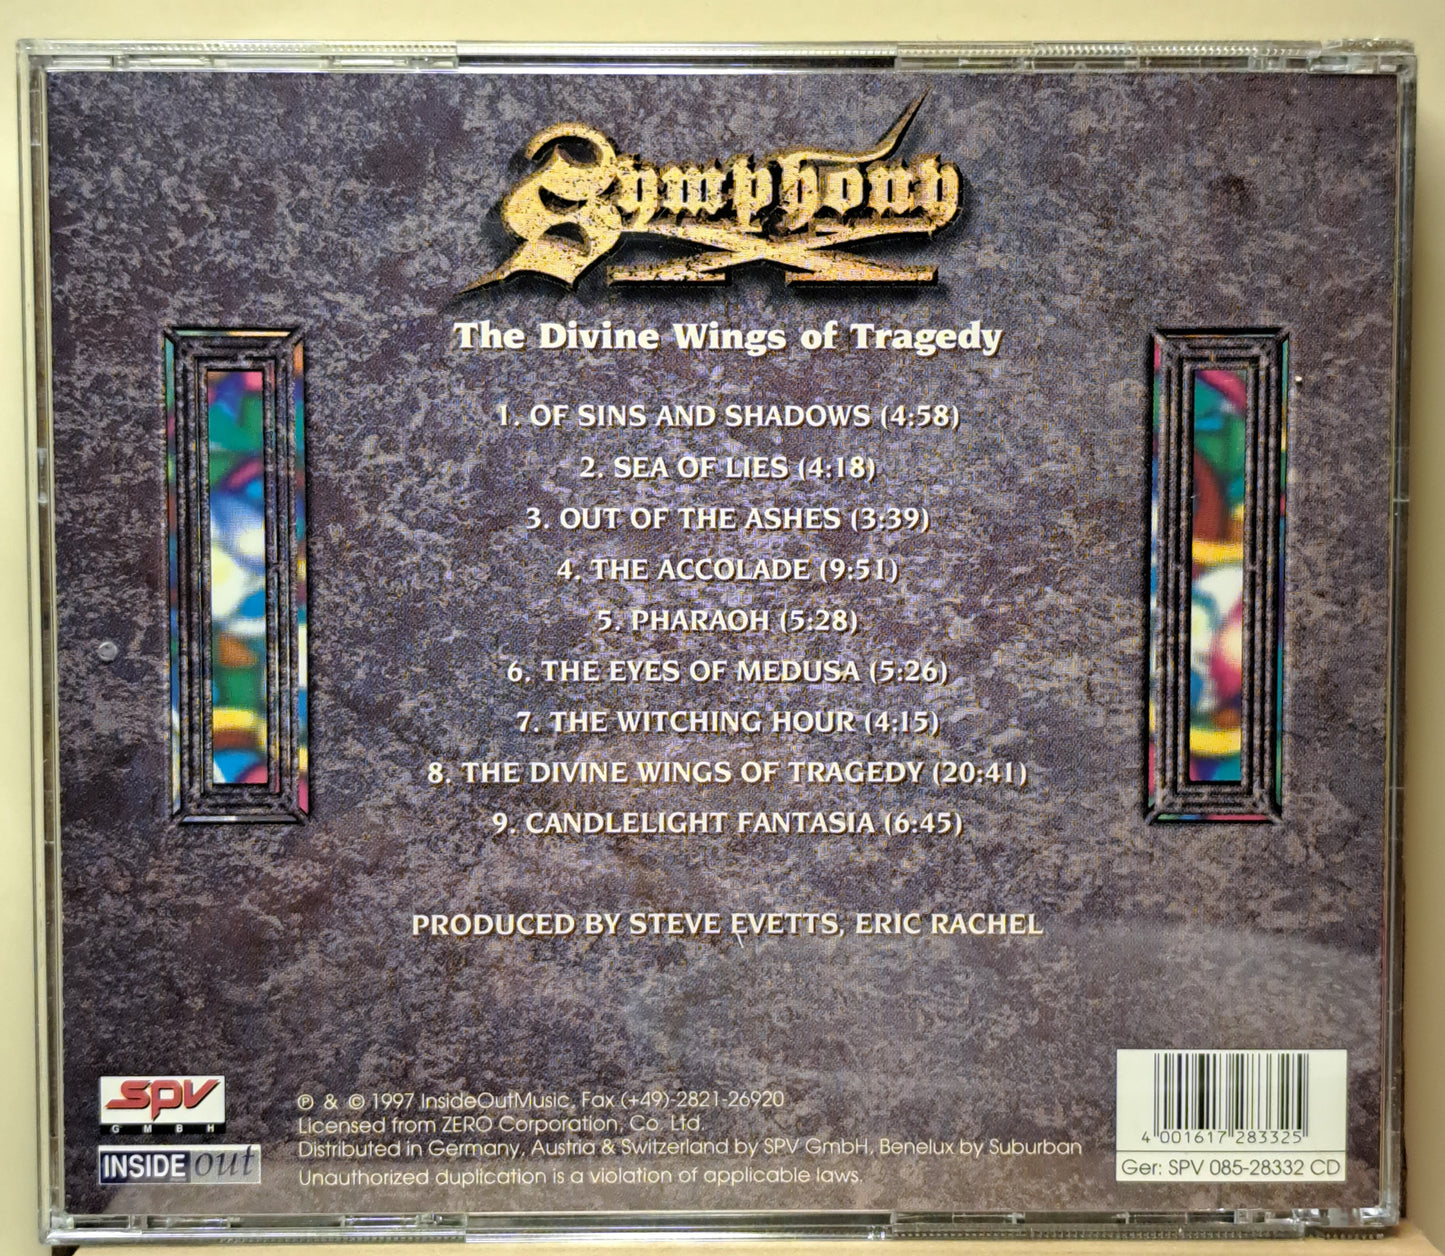 Symphony X - The divine wings of tragedy (cd)